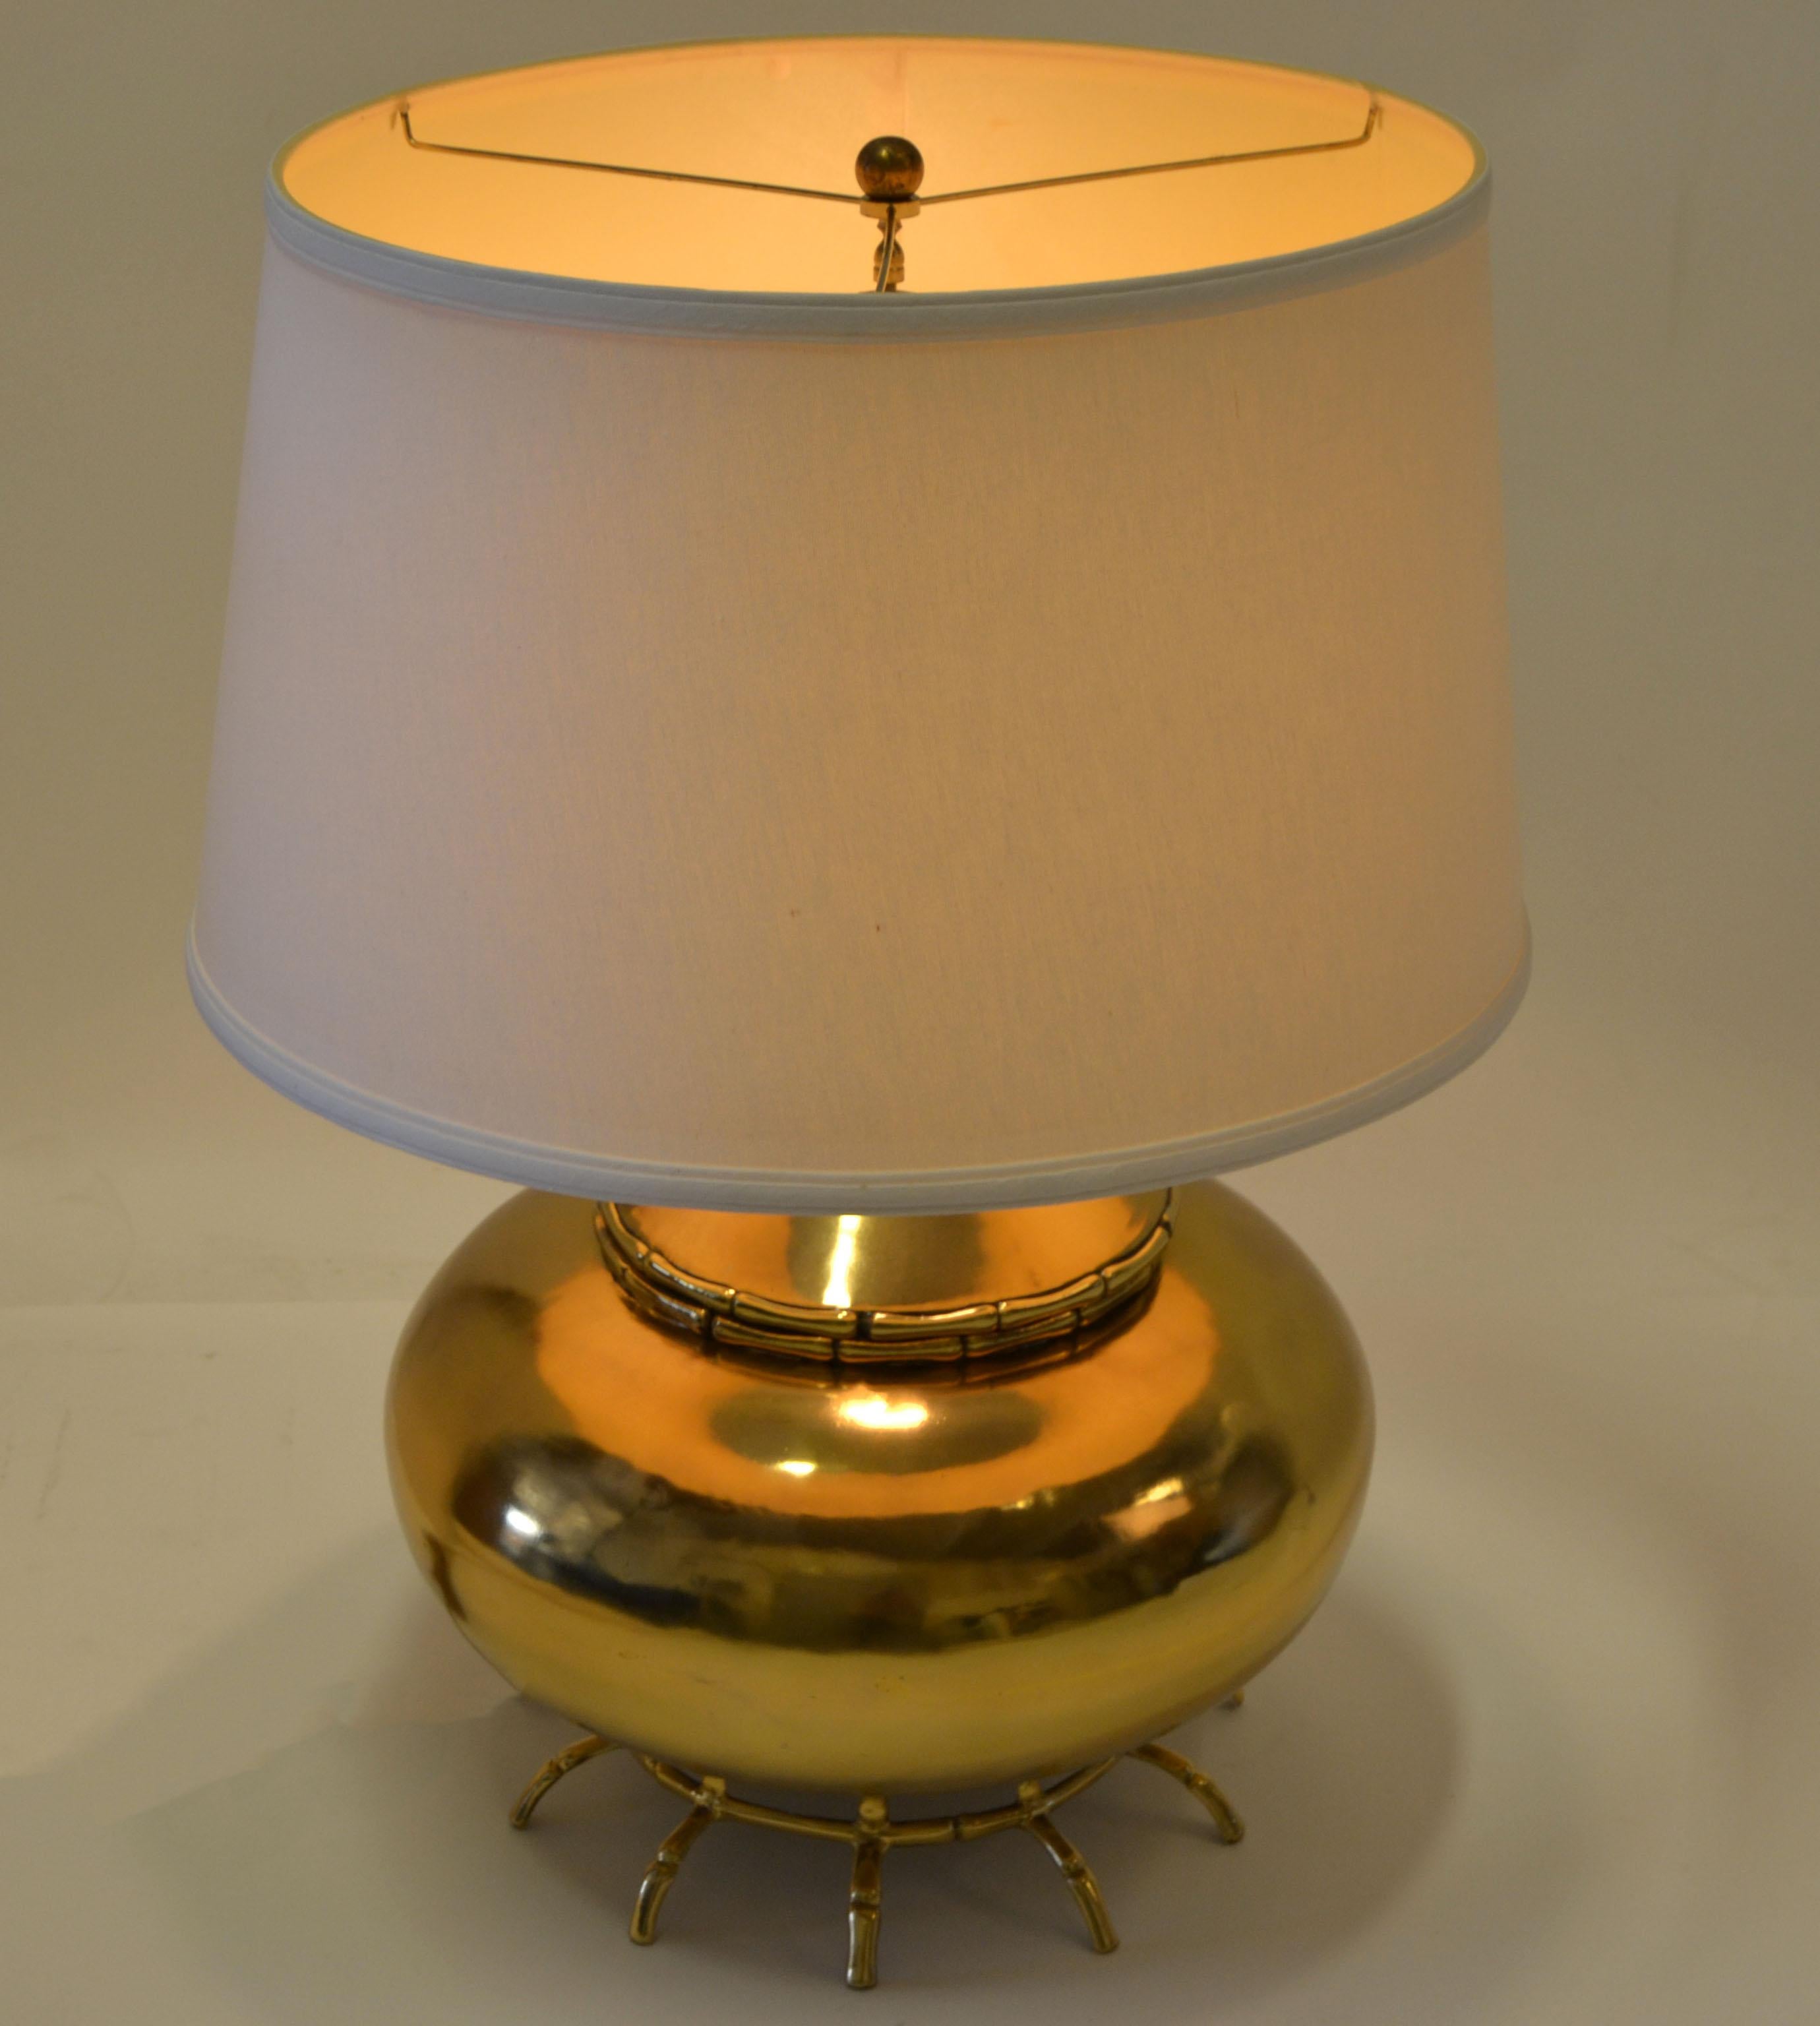 Polished Vintage Round Brass Table Lamp Spider Legs Mid-Century Modern, 1970 For Sale